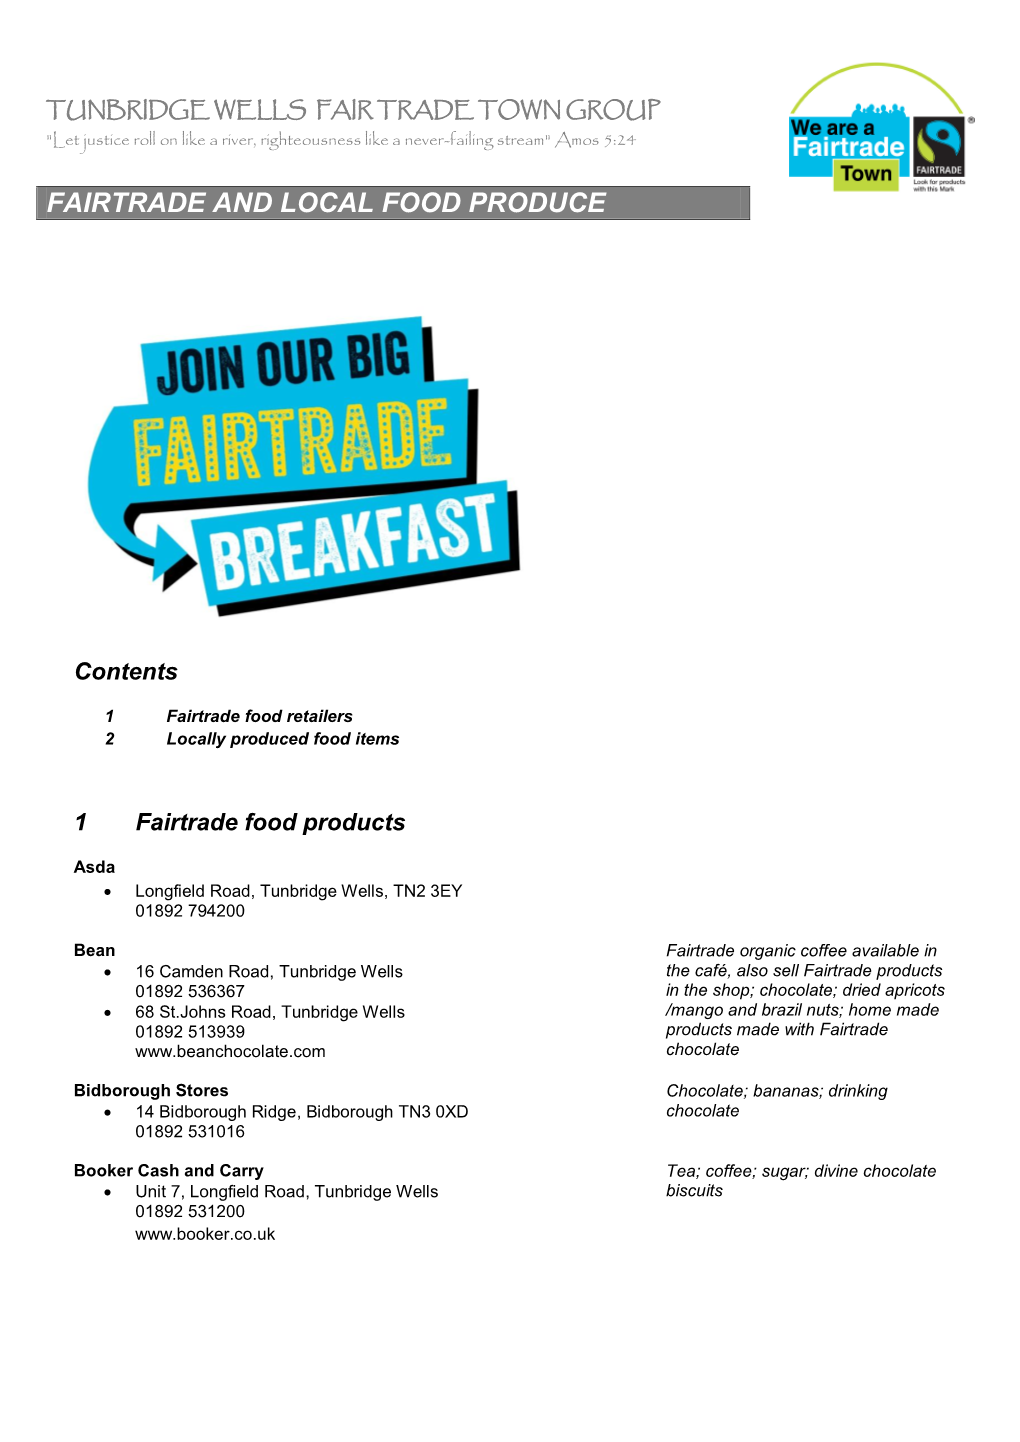 Fairtrade and Local Food Produce